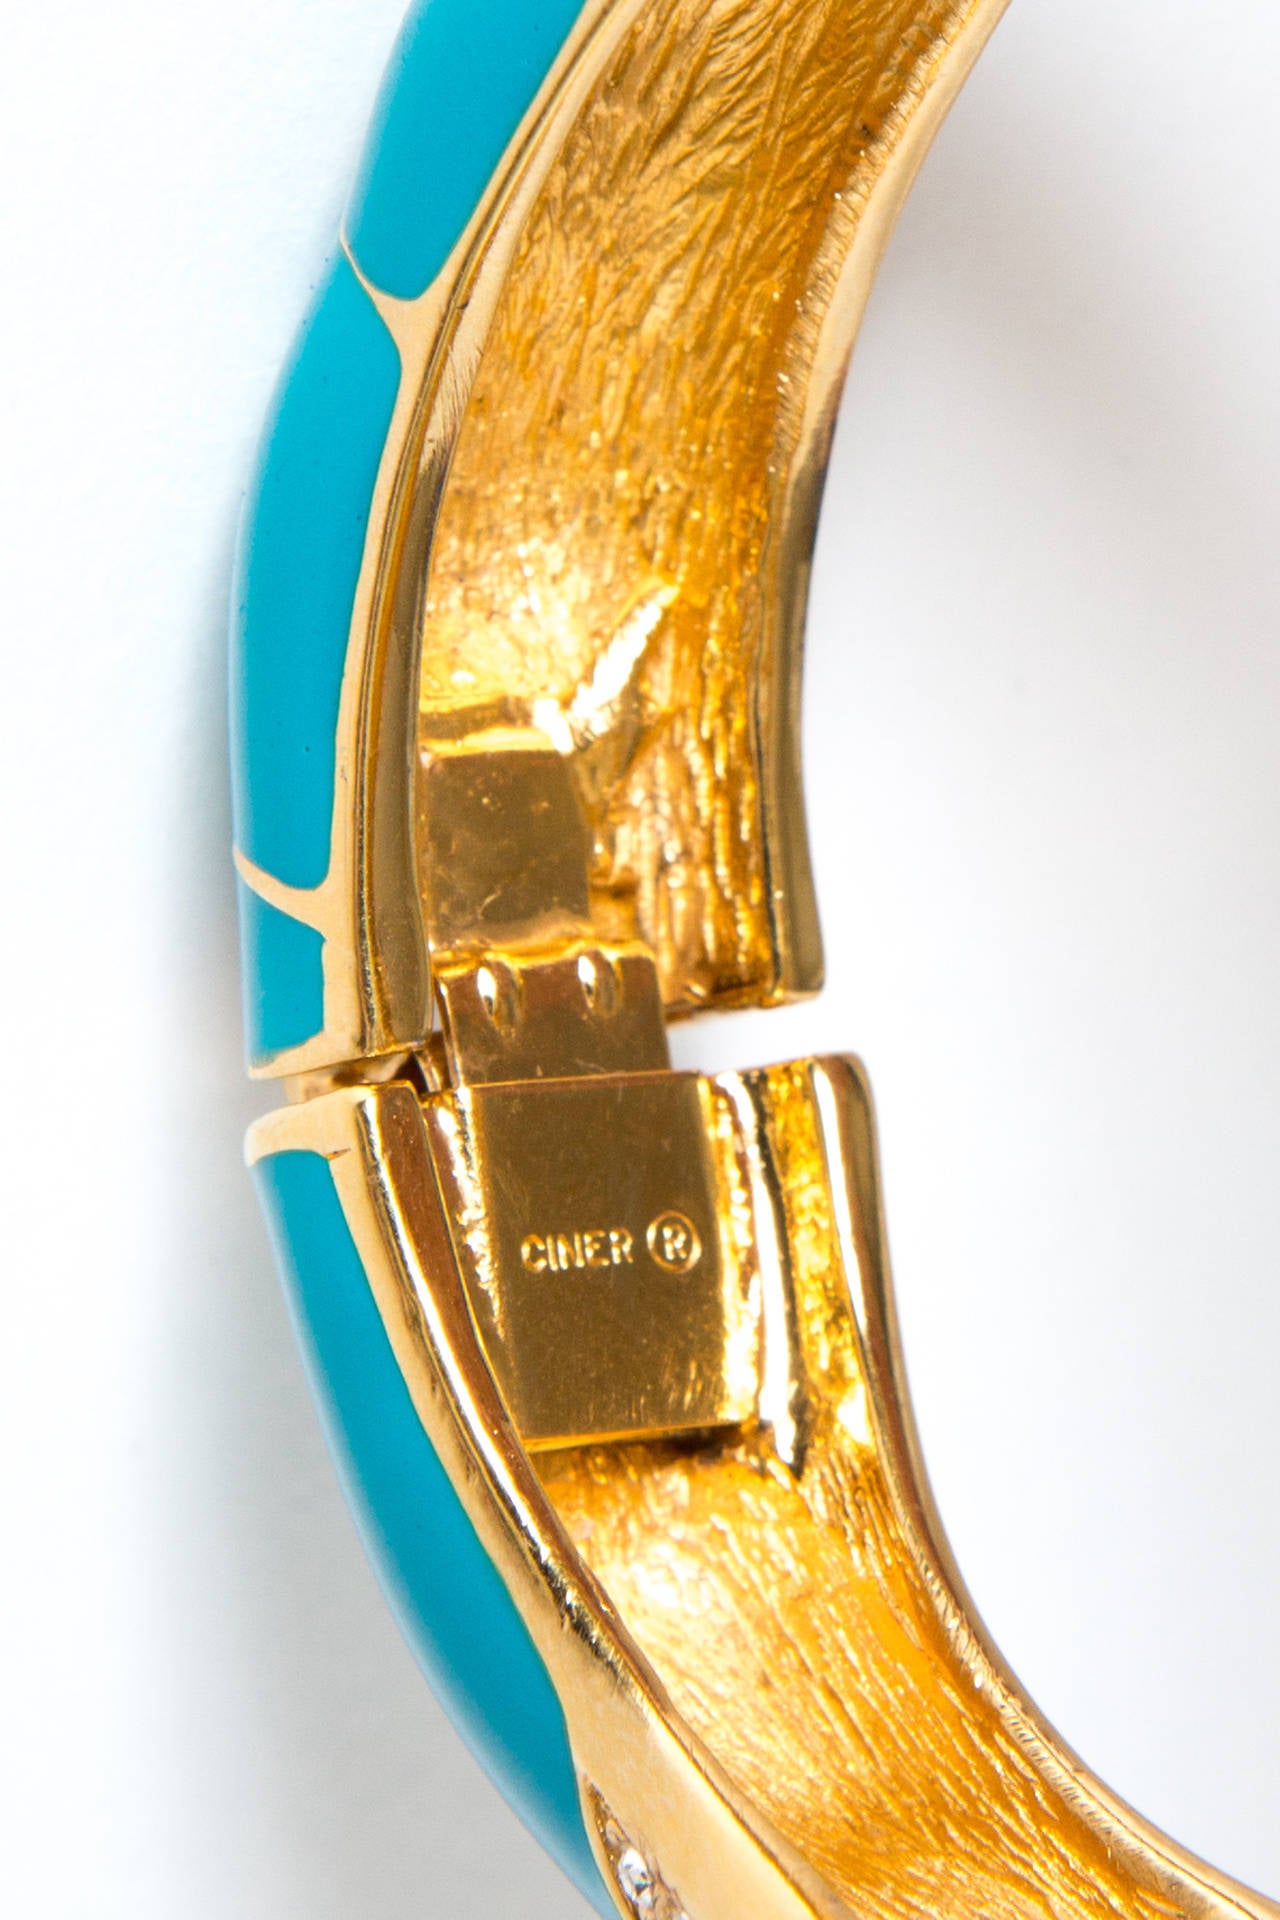 Women's Gold-Tone and Turquoise Ciner Dolphin Bangle